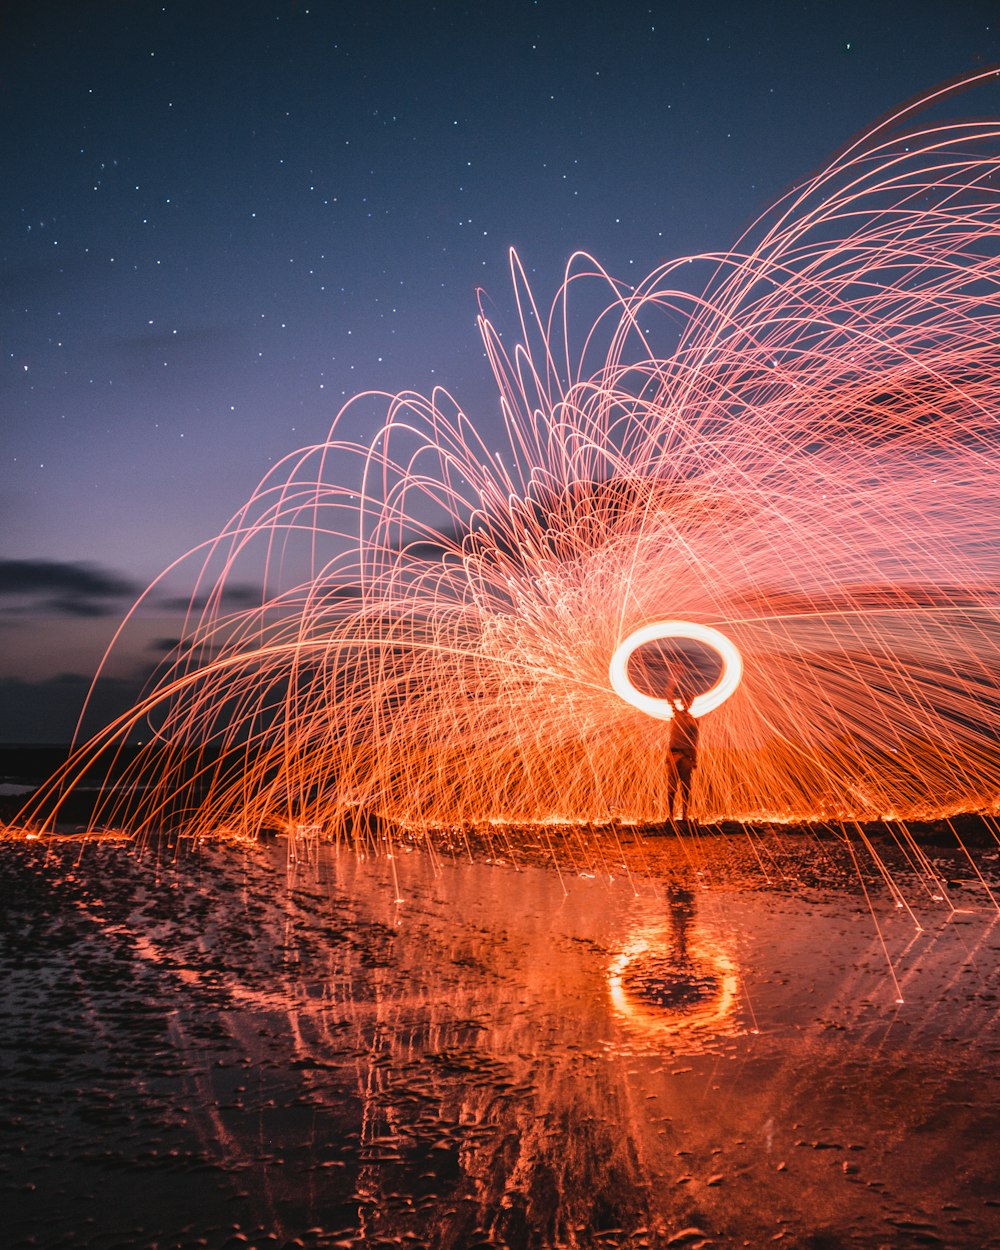 steel wool photography of man standing on body of water at nigh time